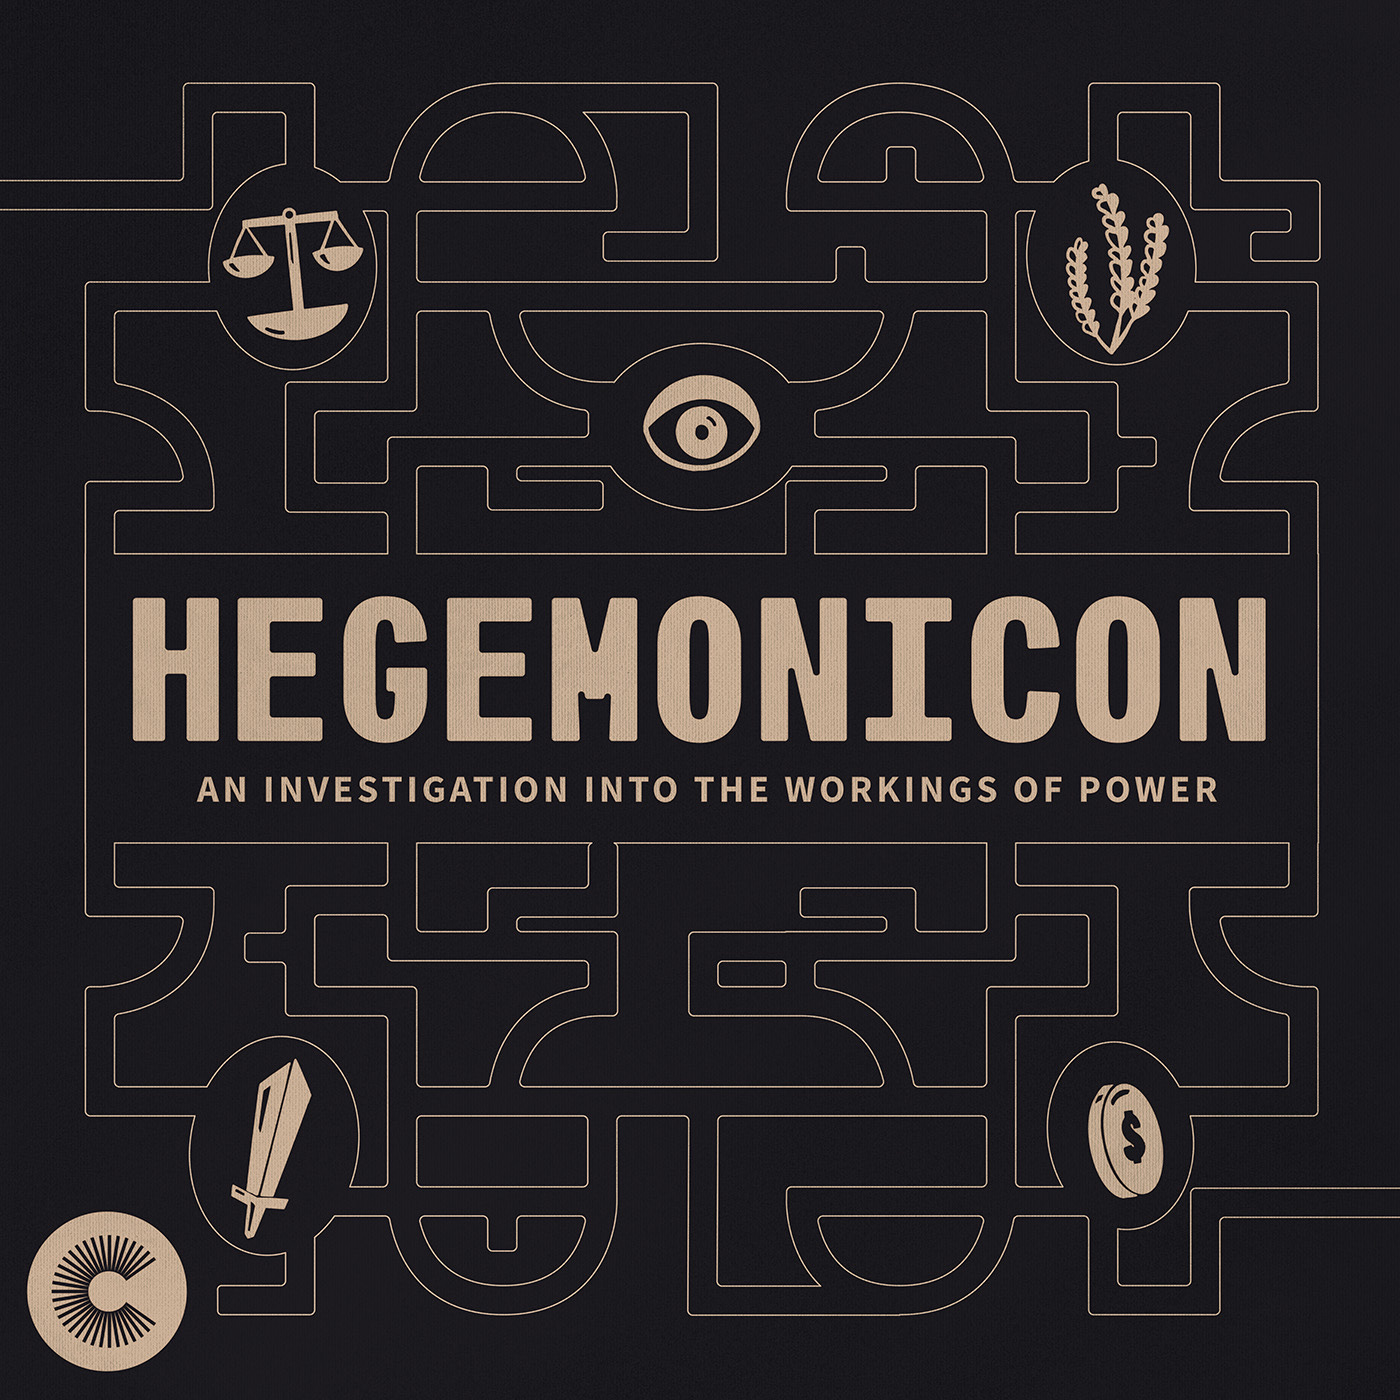 Hegemonicon: An investigation into the workings of power